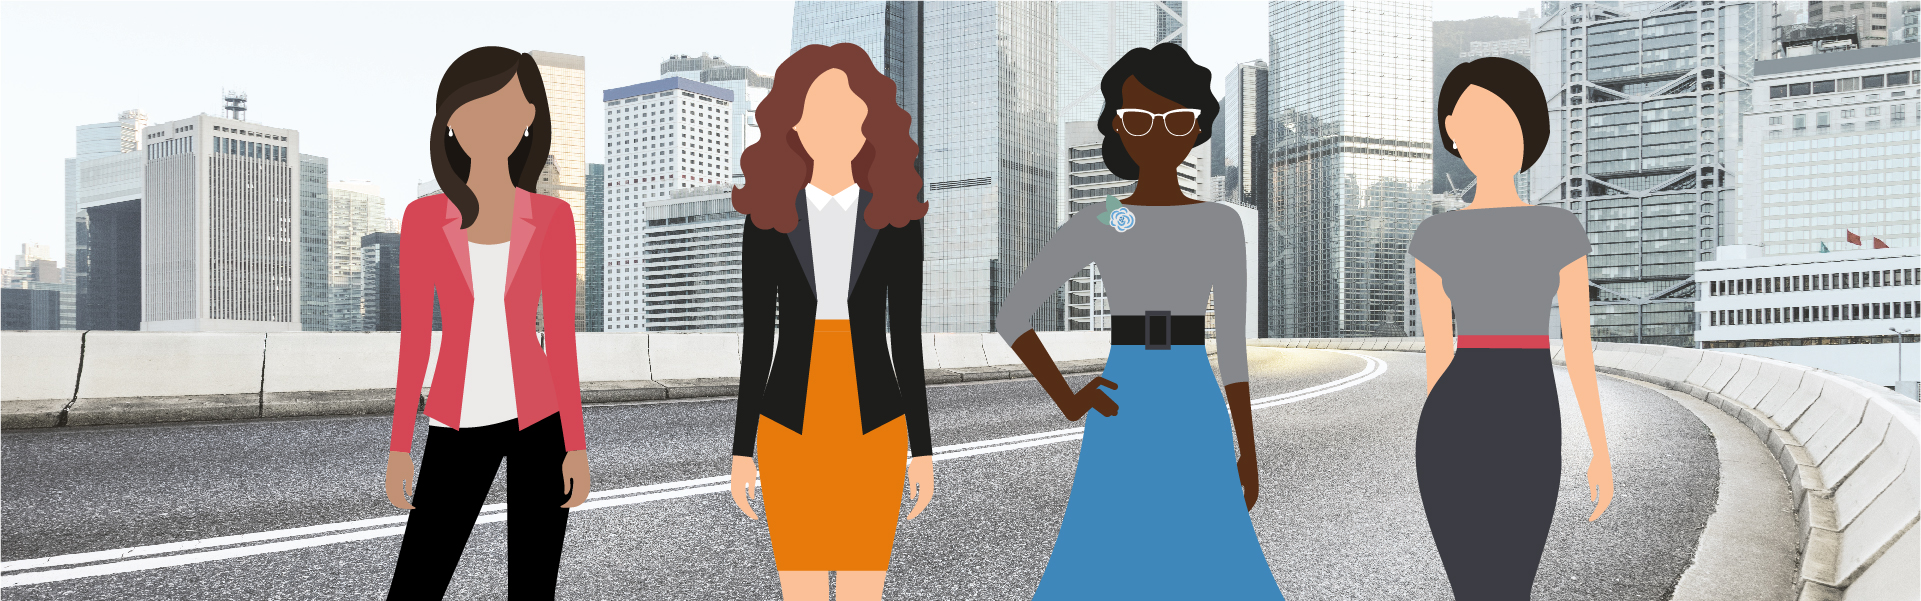 How to Attract and Retain Female Talent in 2020